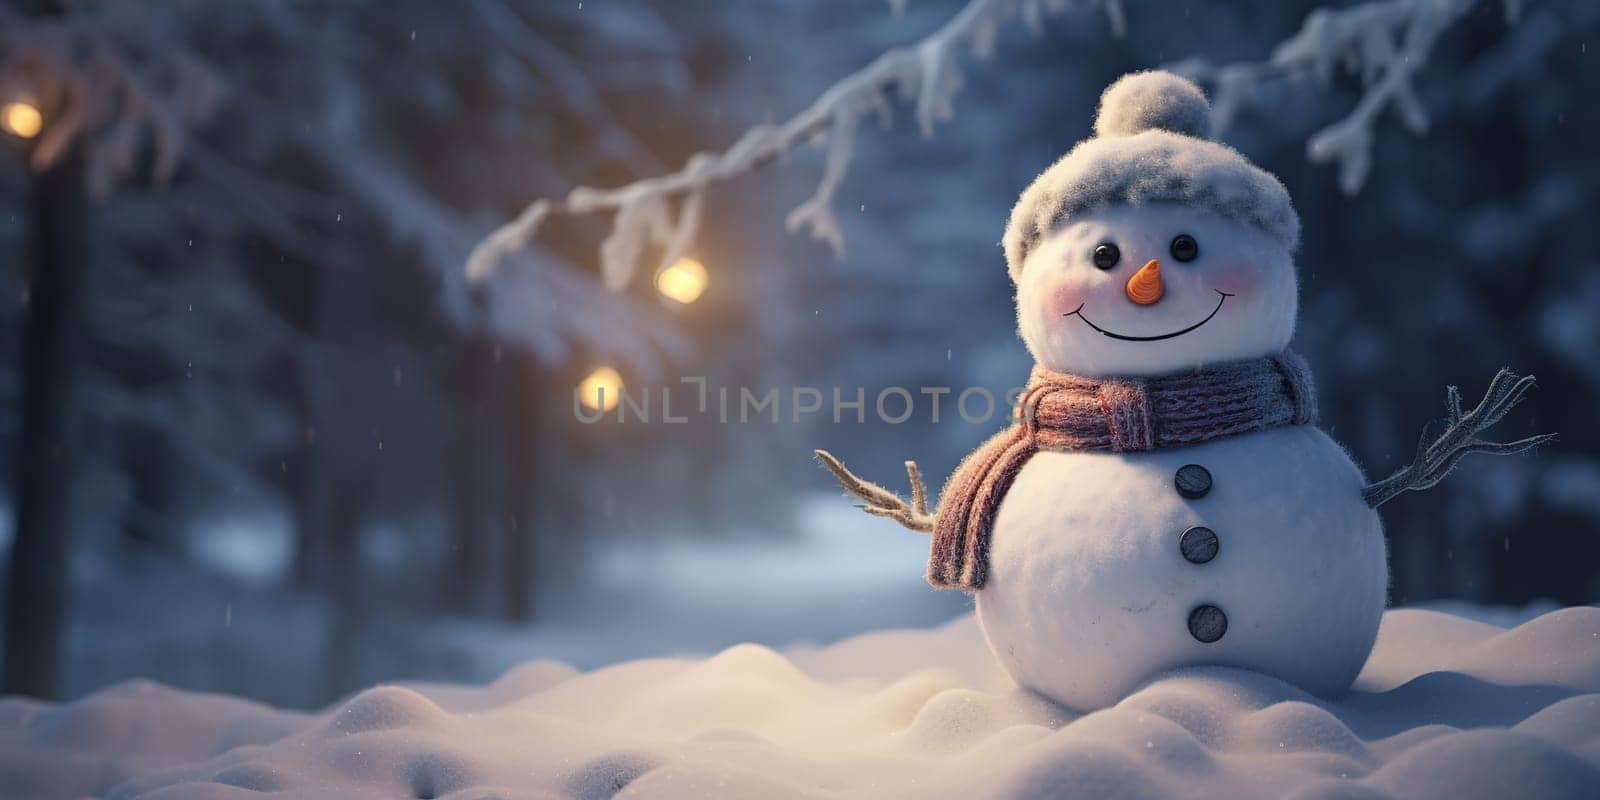 A smiling snowman outside during lovely winter time with lot of snow around